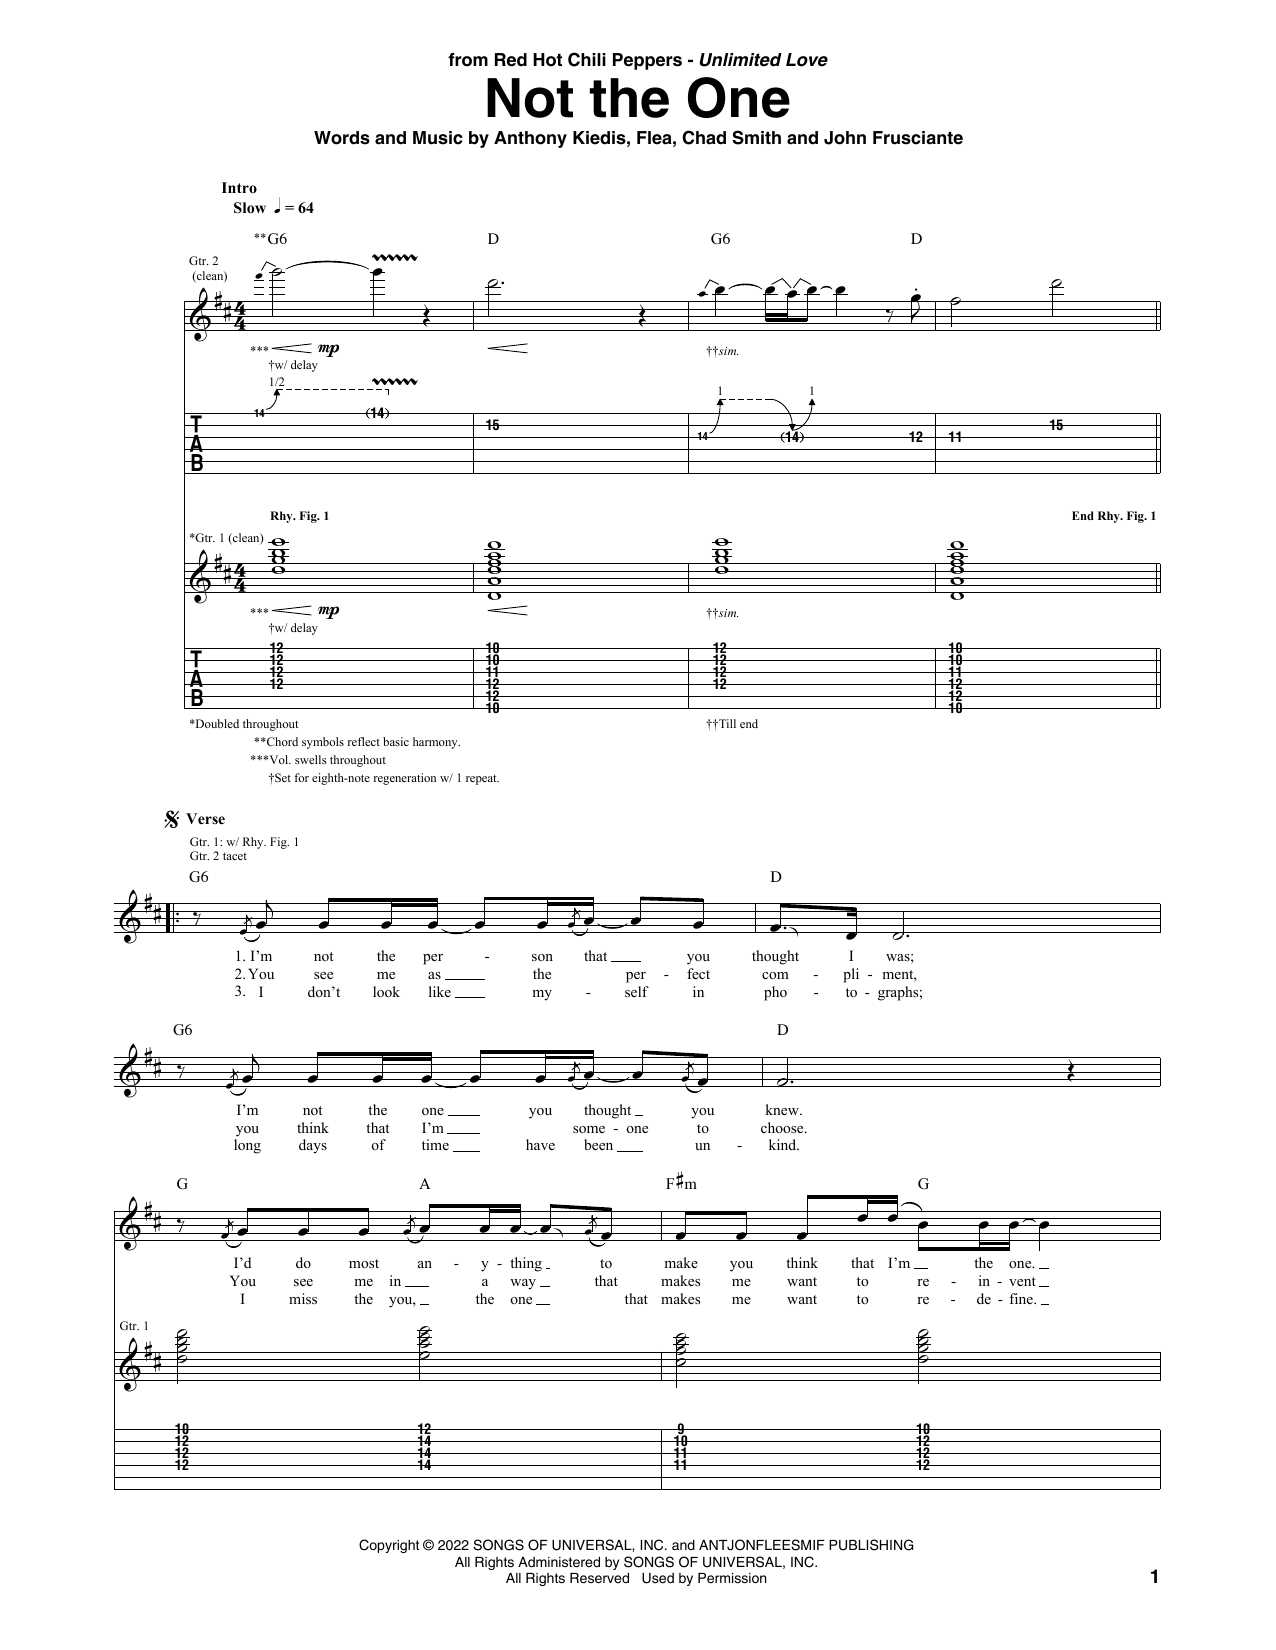 Download Red Hot Chili Peppers Not The One Sheet Music